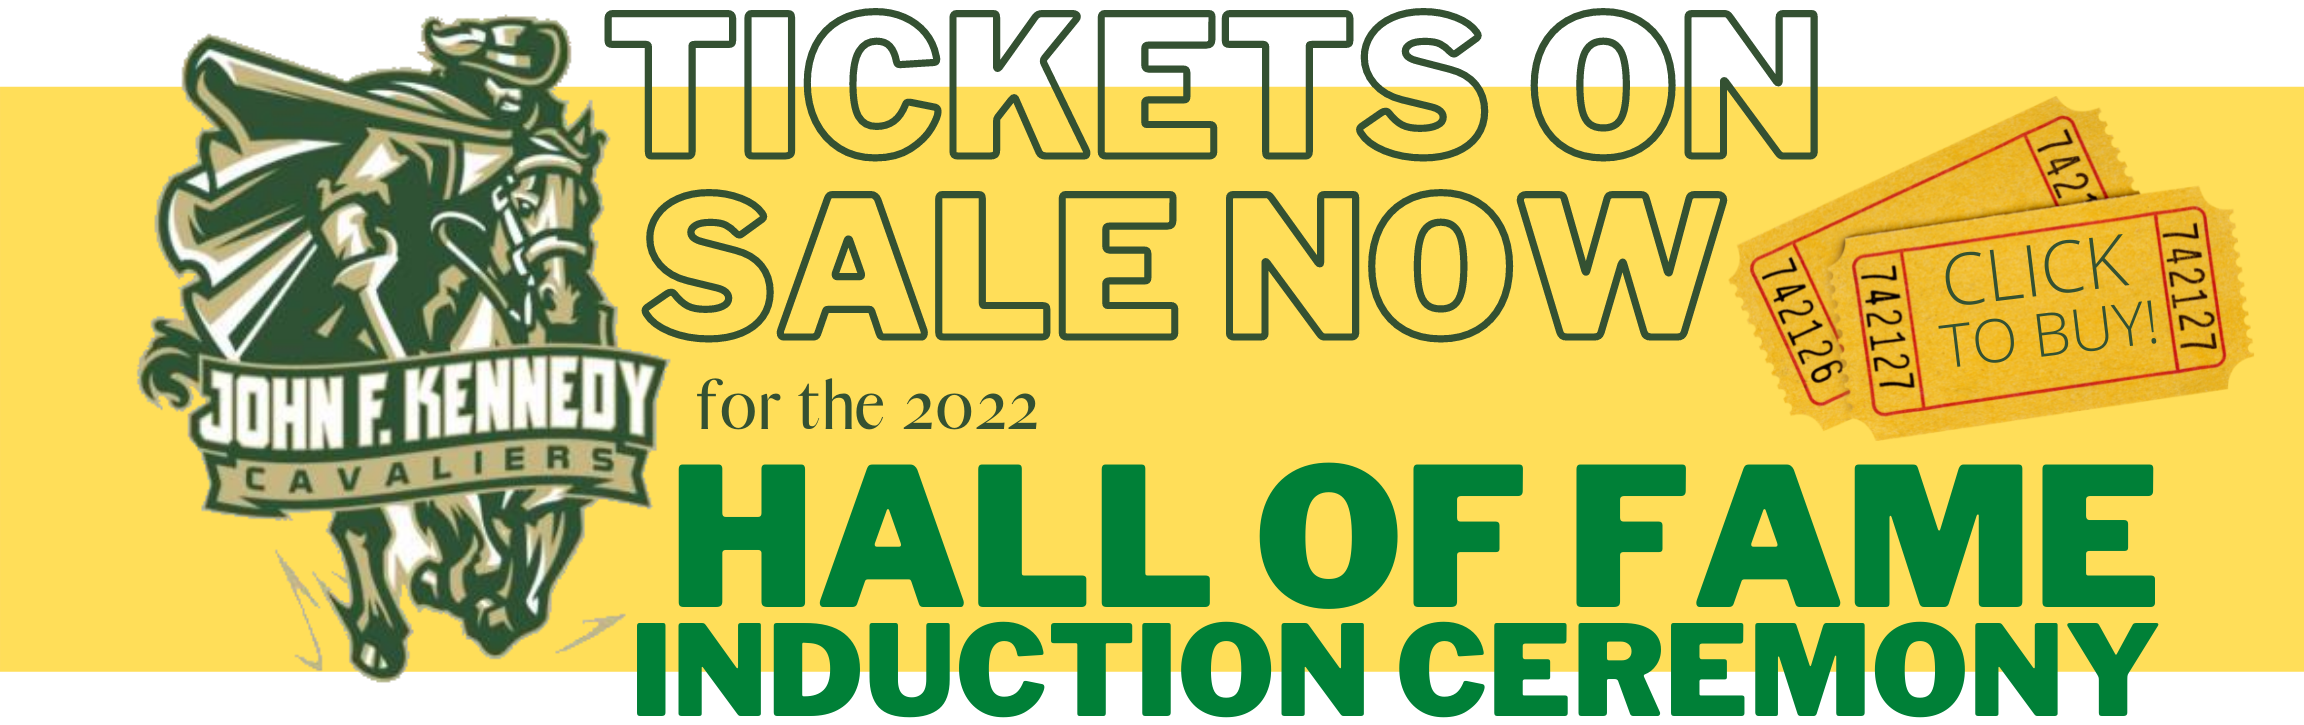 2022 HOF ticket purchase link graphic.png